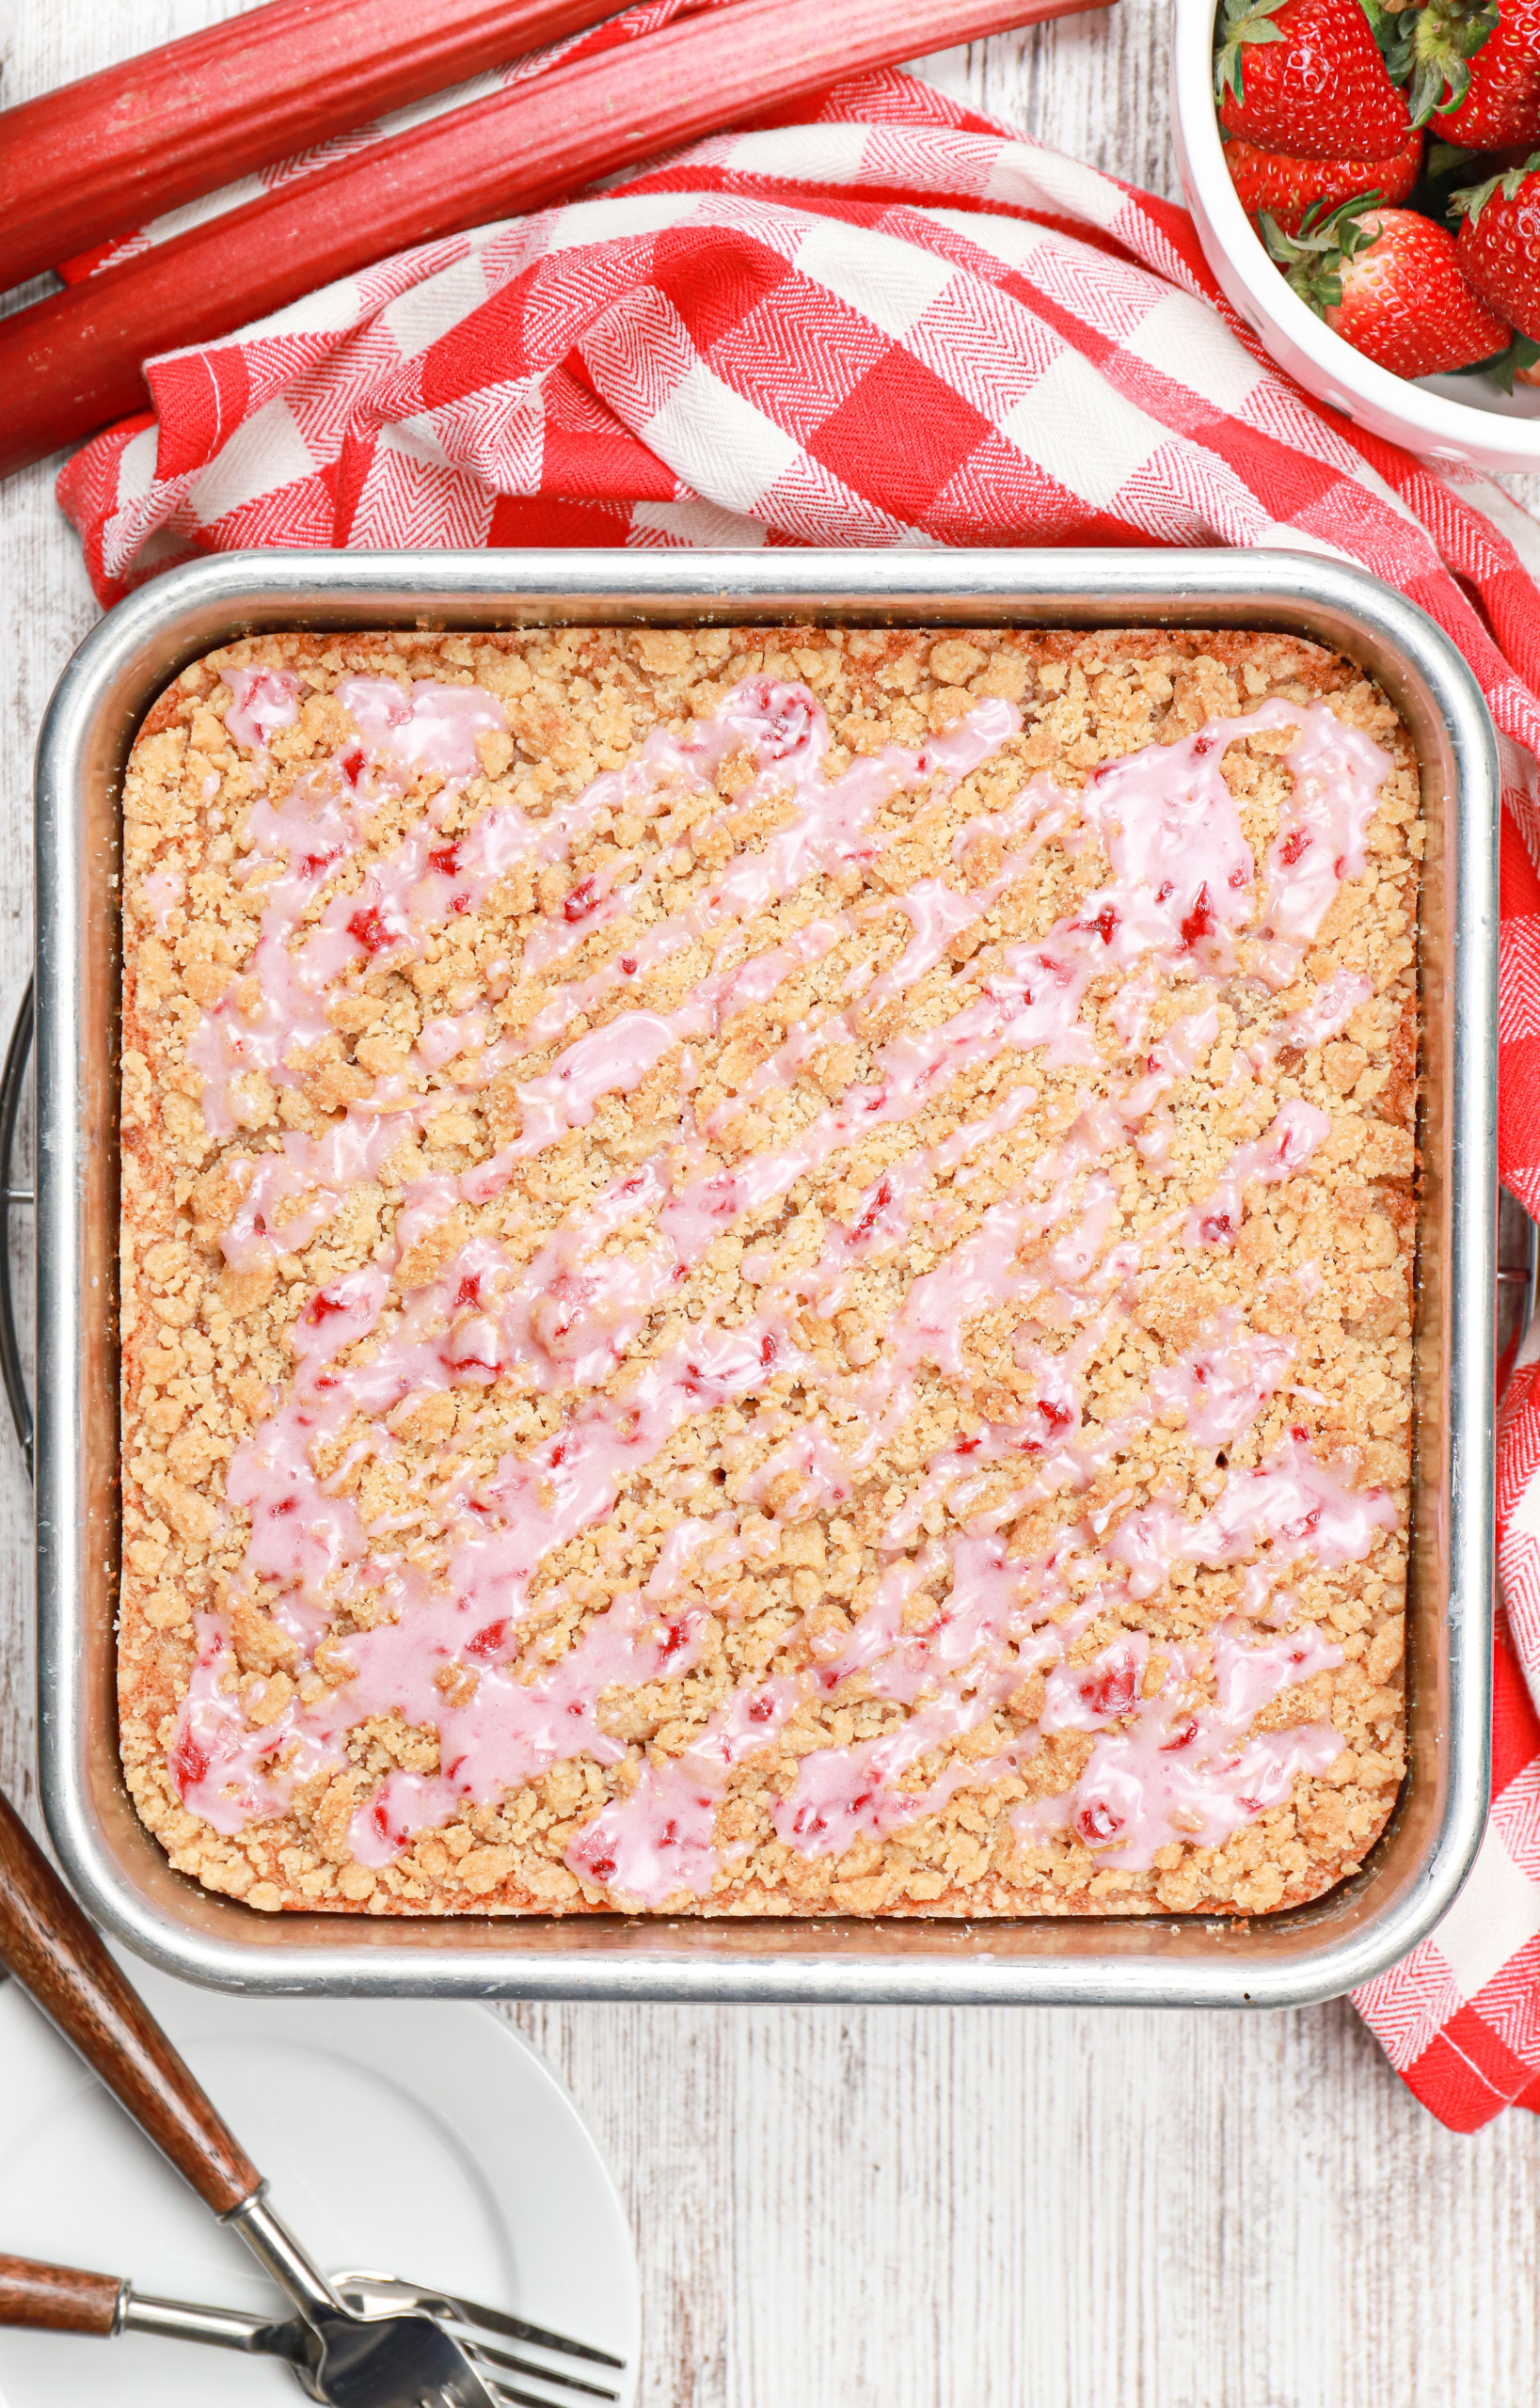 Overhead view of a pan of strawberry rhubarb crumb cake with a strawberry drizzle.